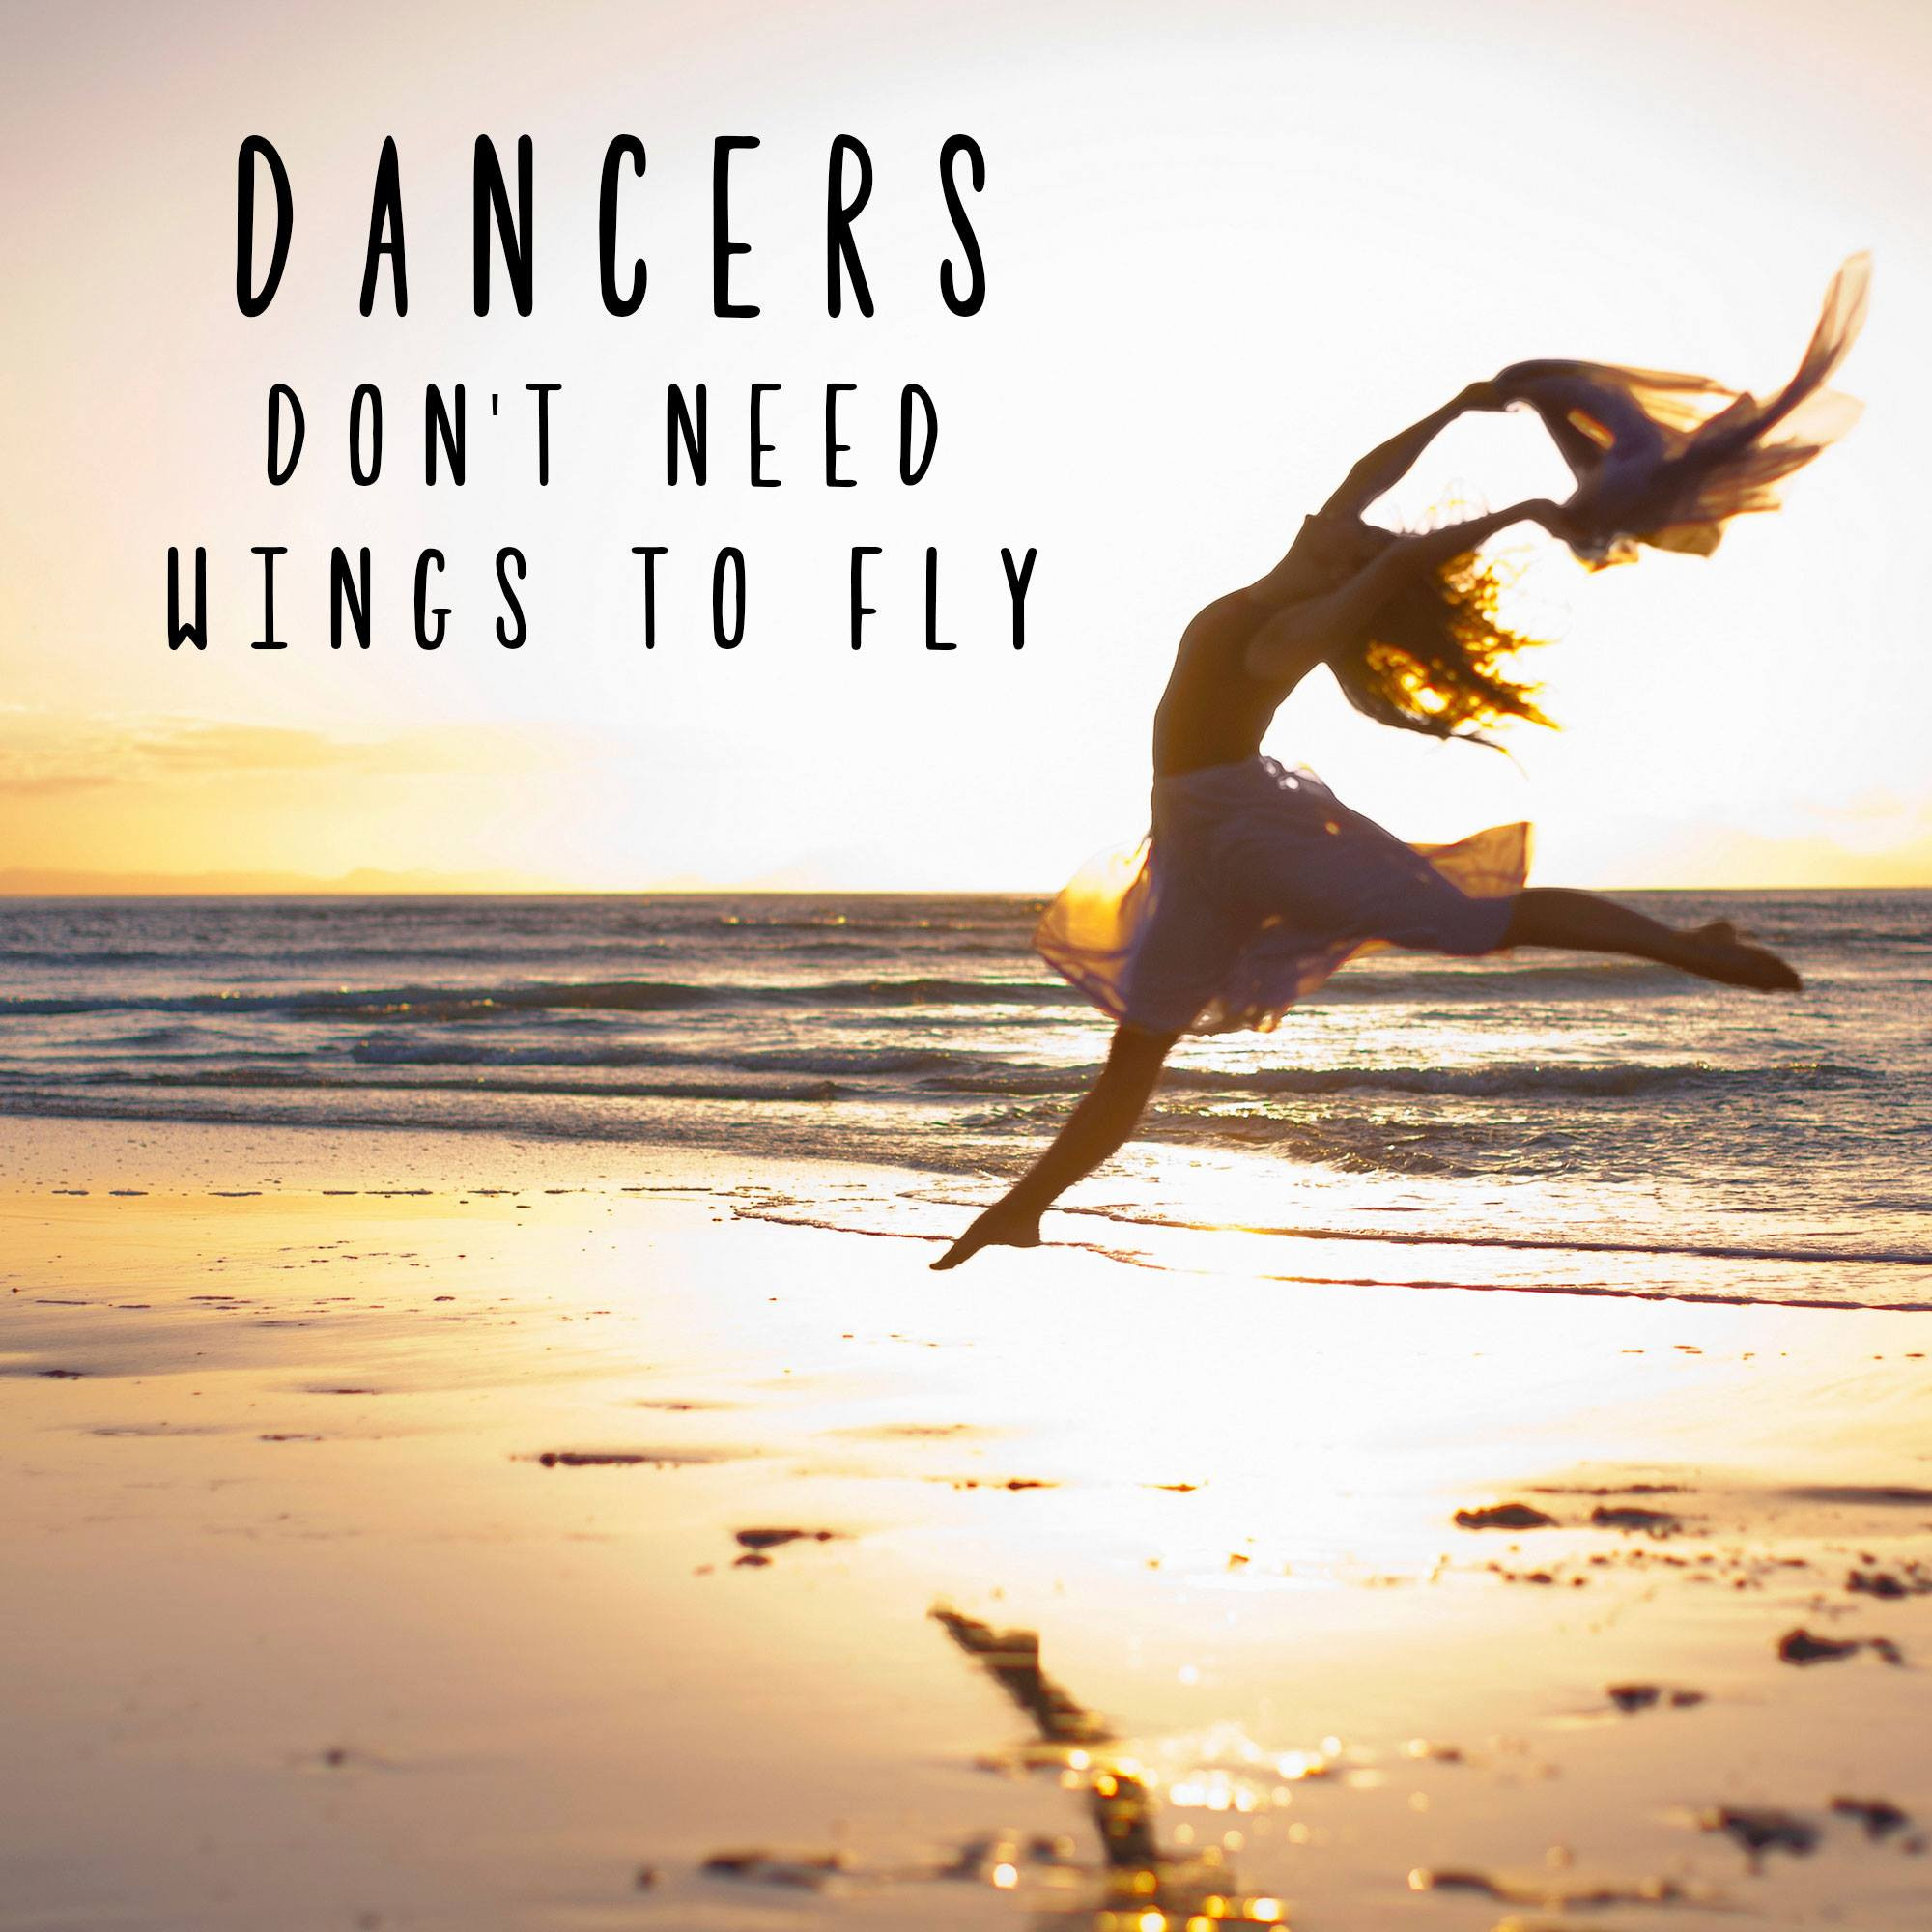 Inspirational Dance Quotes
 12 Inspirational Dance Quotes